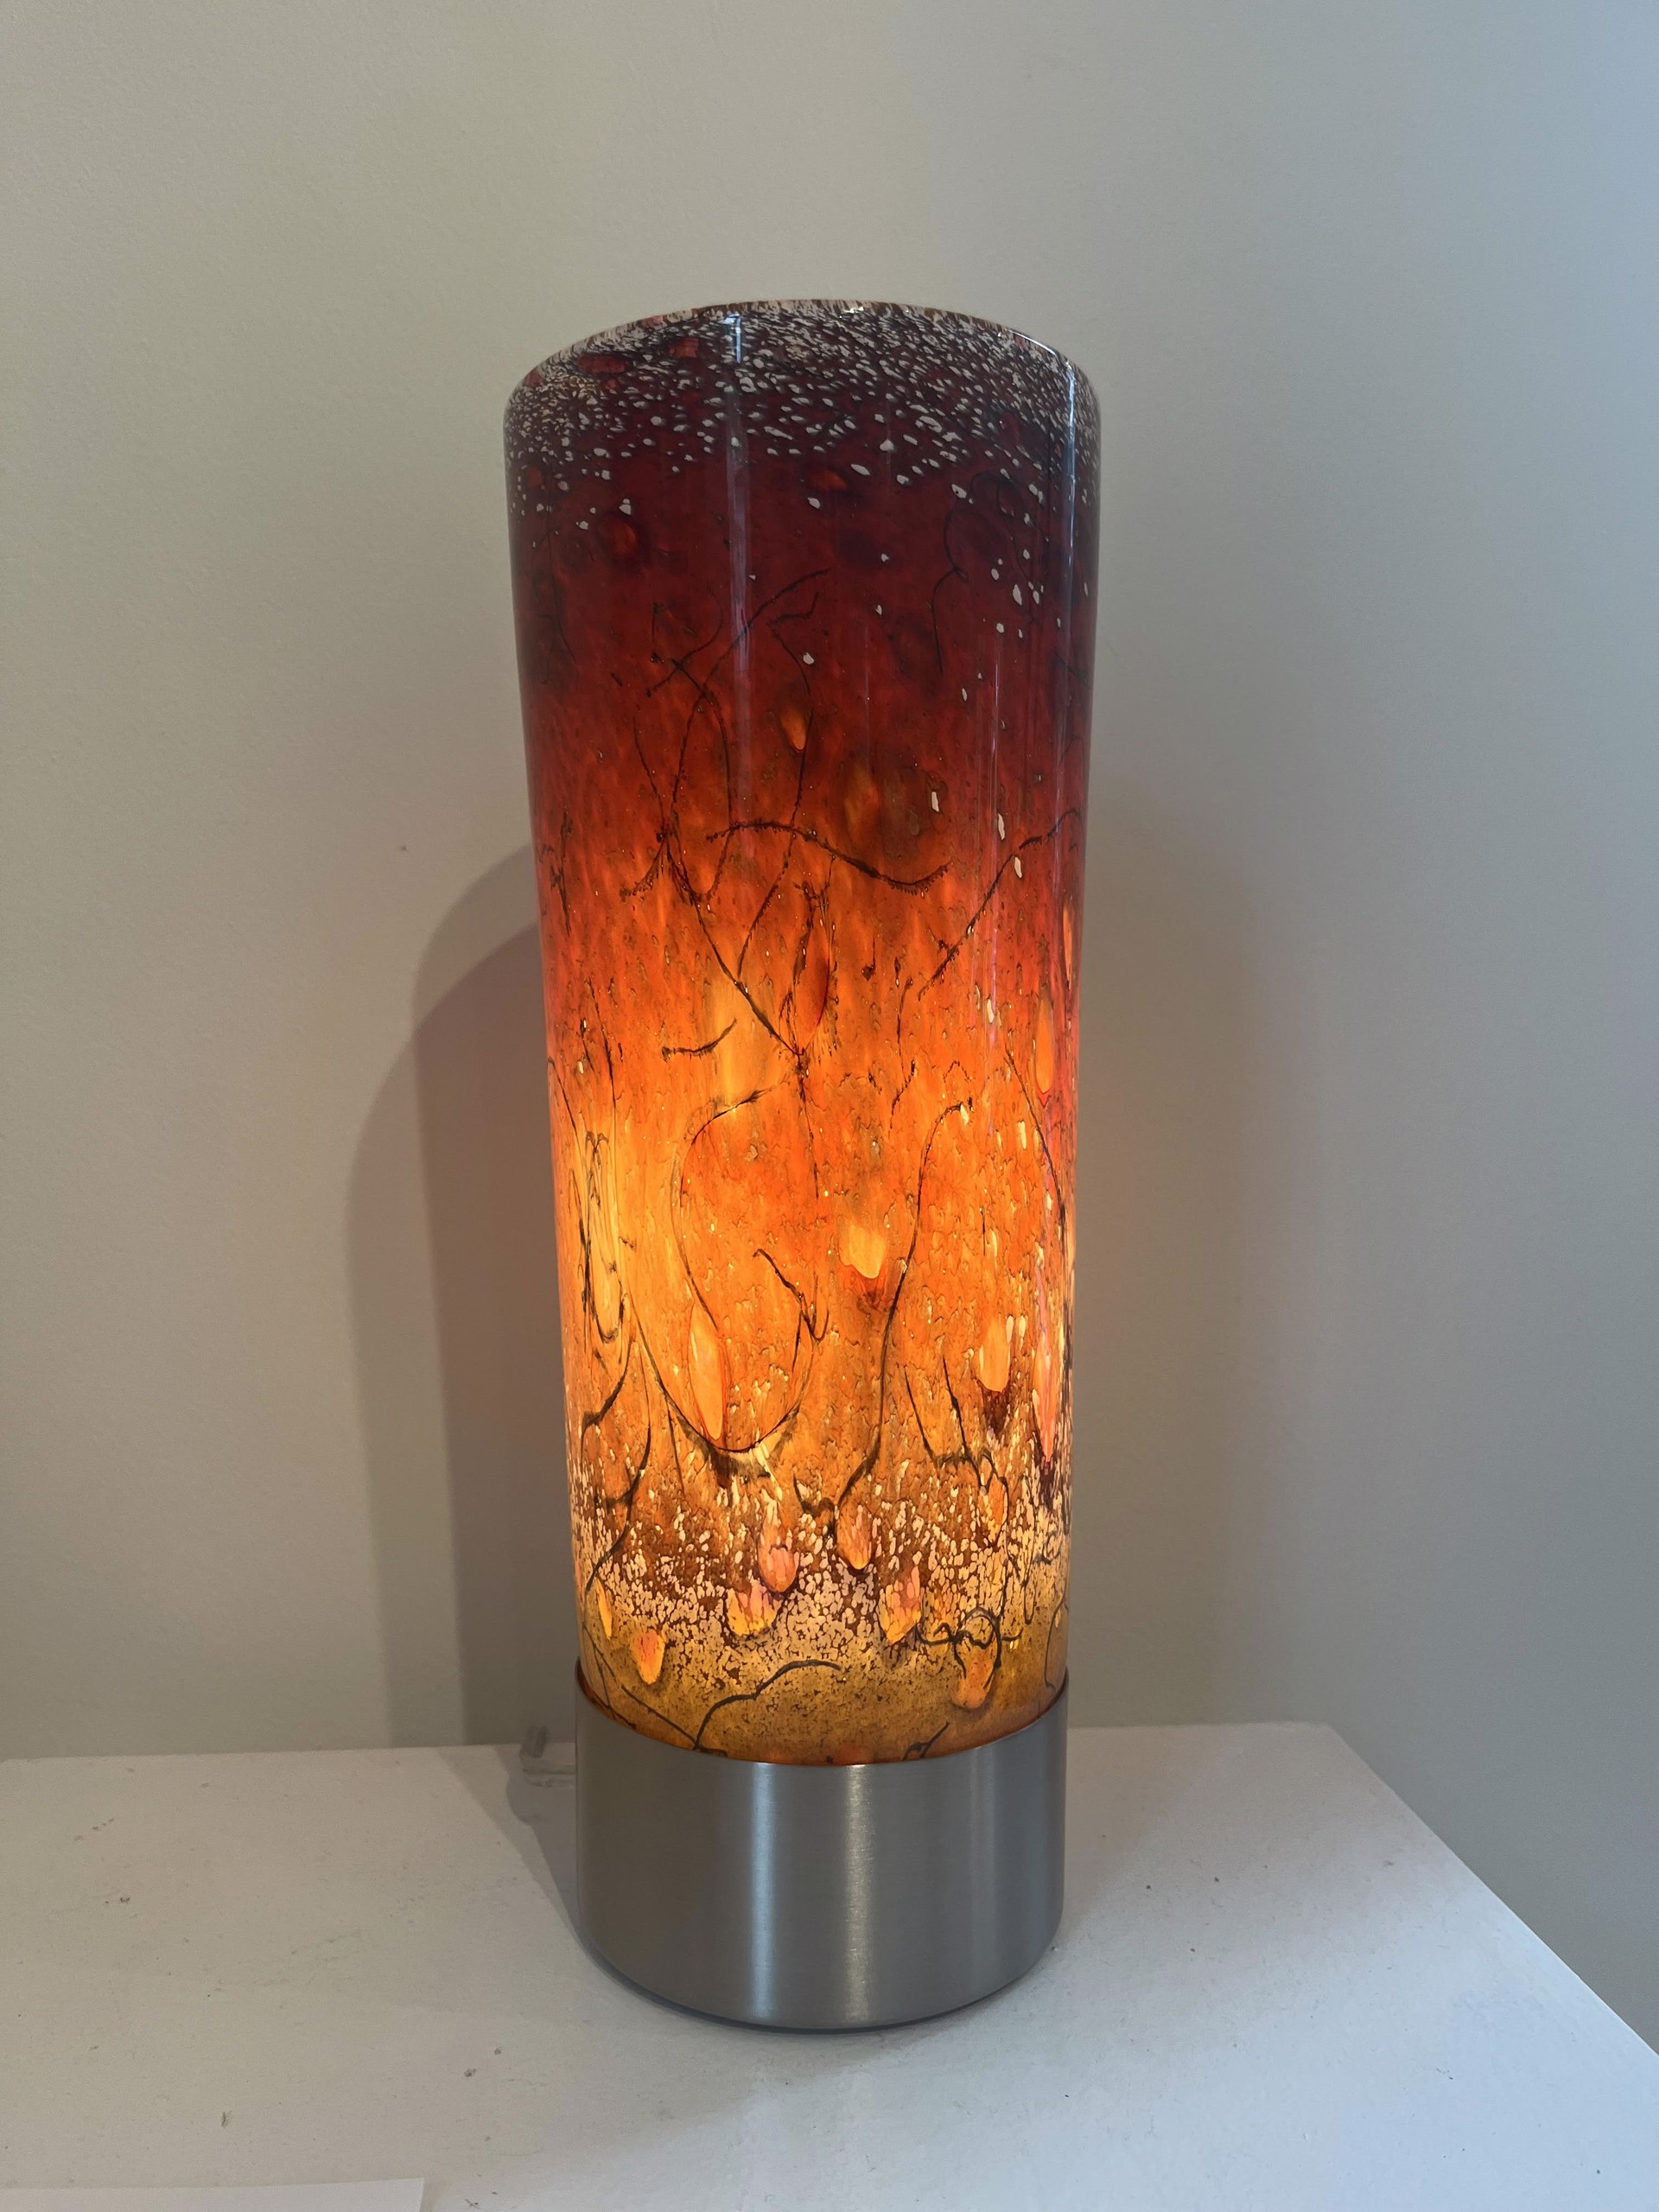 Lava Lamp by Curtiss Brock